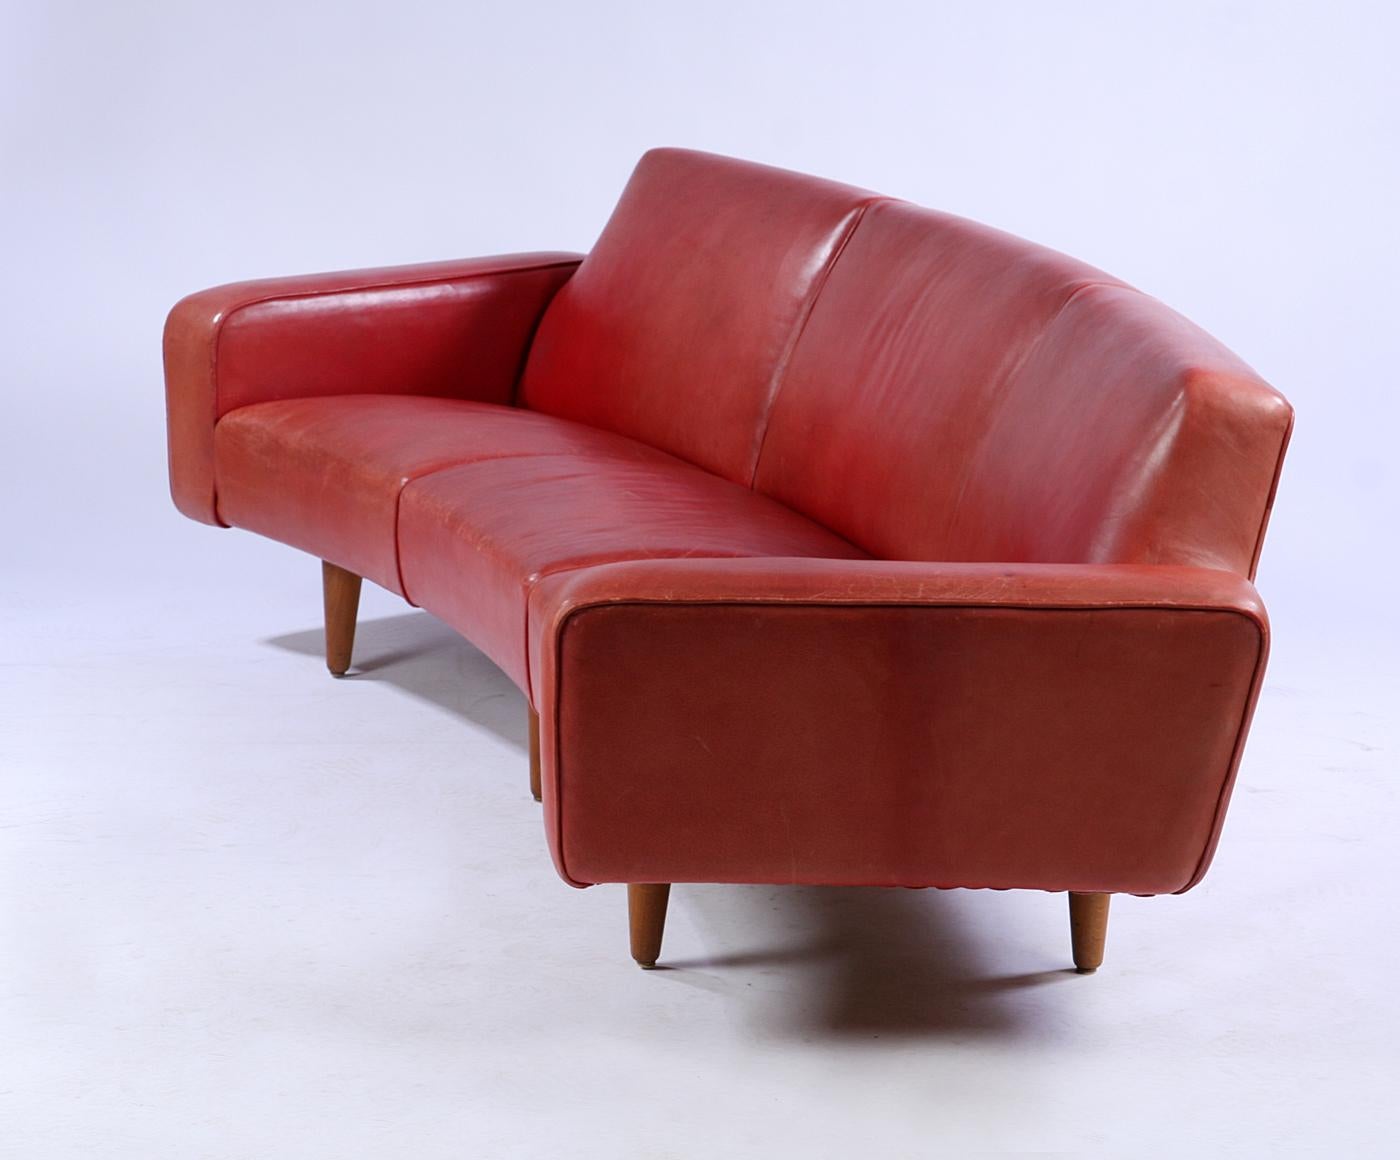 Designed by Illum Wikkelso and made by Aarhuspolstermobelfabrik in the 1960s, this curved sofa retains its original red leather and a matching coffee table. As shown in the scanned advertisement from the 1960s, the coffee table fits nicely with the